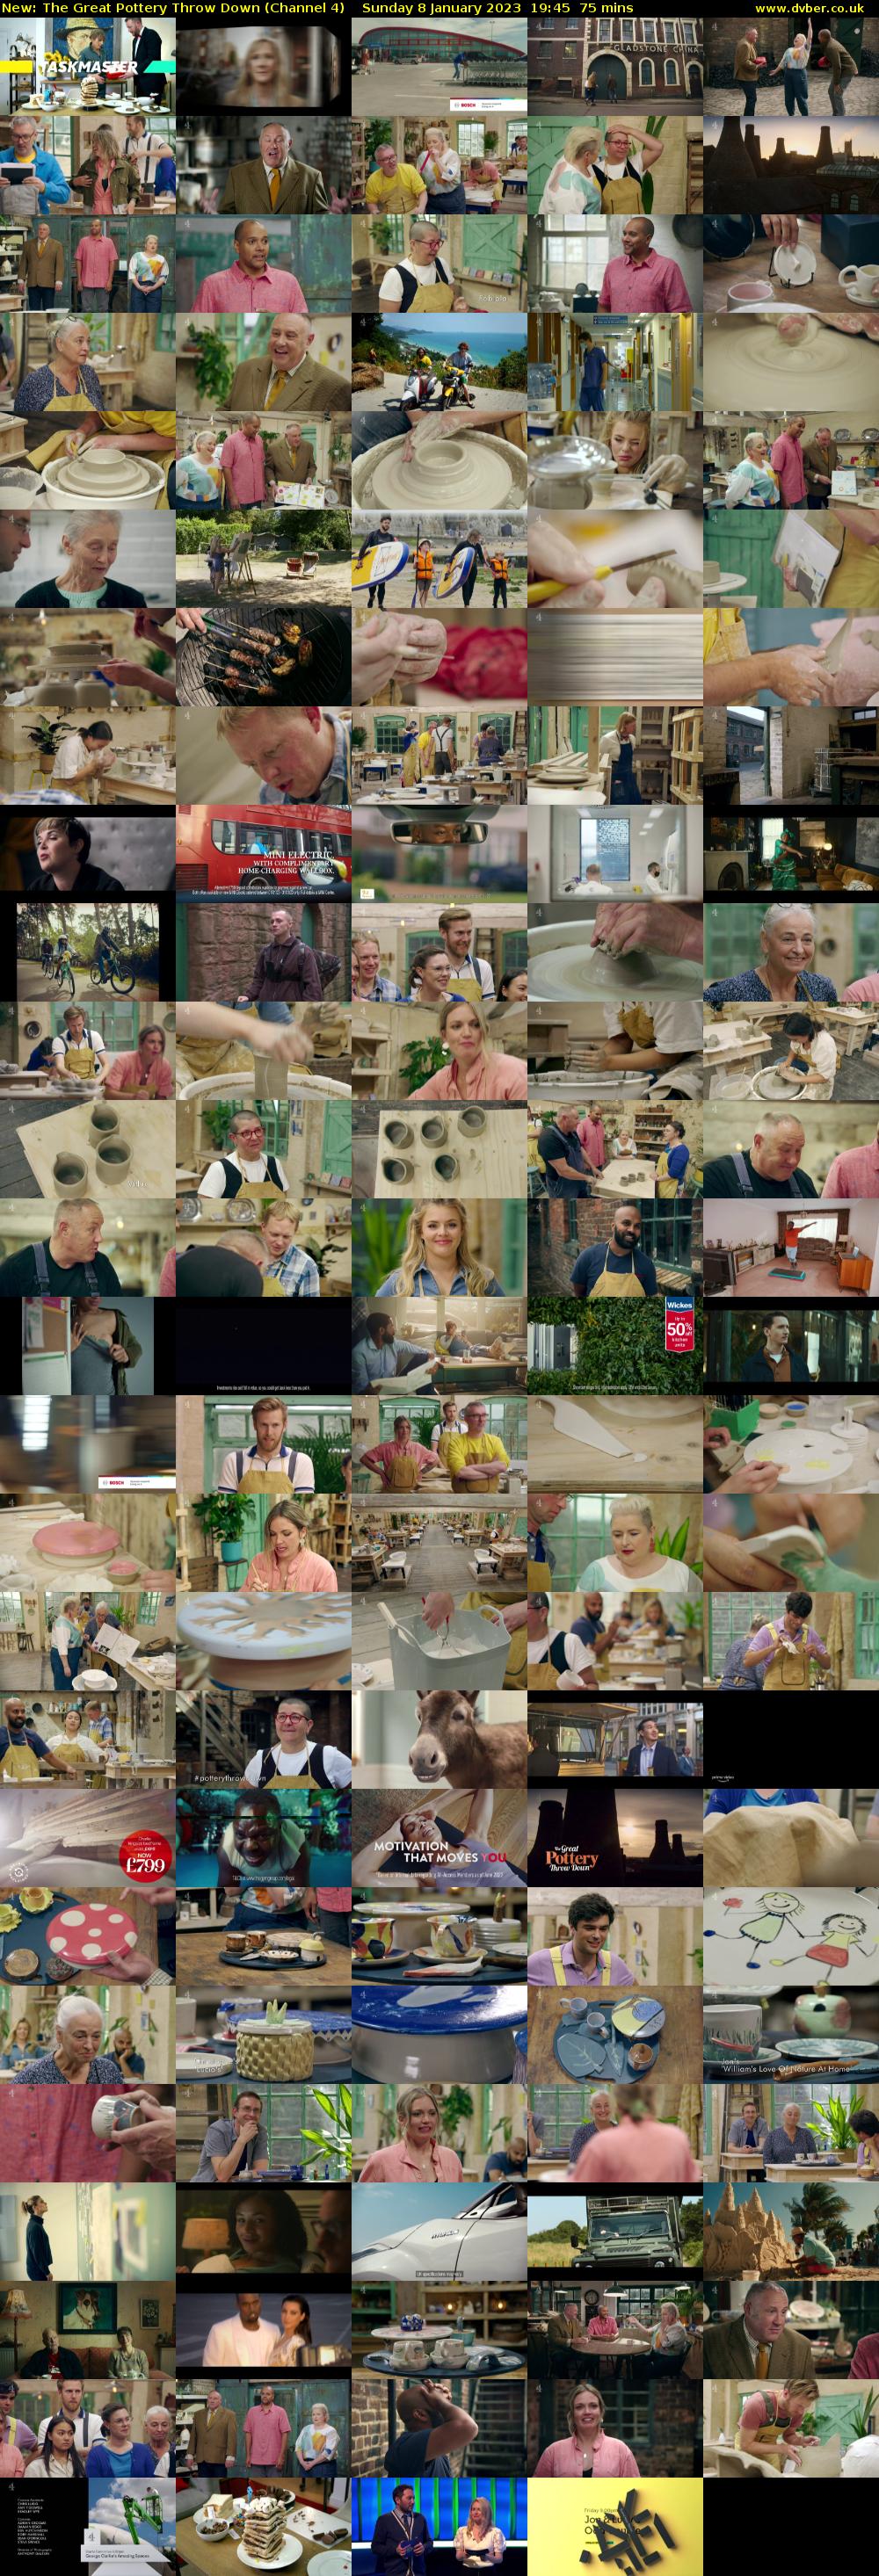 The Great Pottery Throw Down (Channel 4) Sunday 8 January 2023 19:45 - 21:00